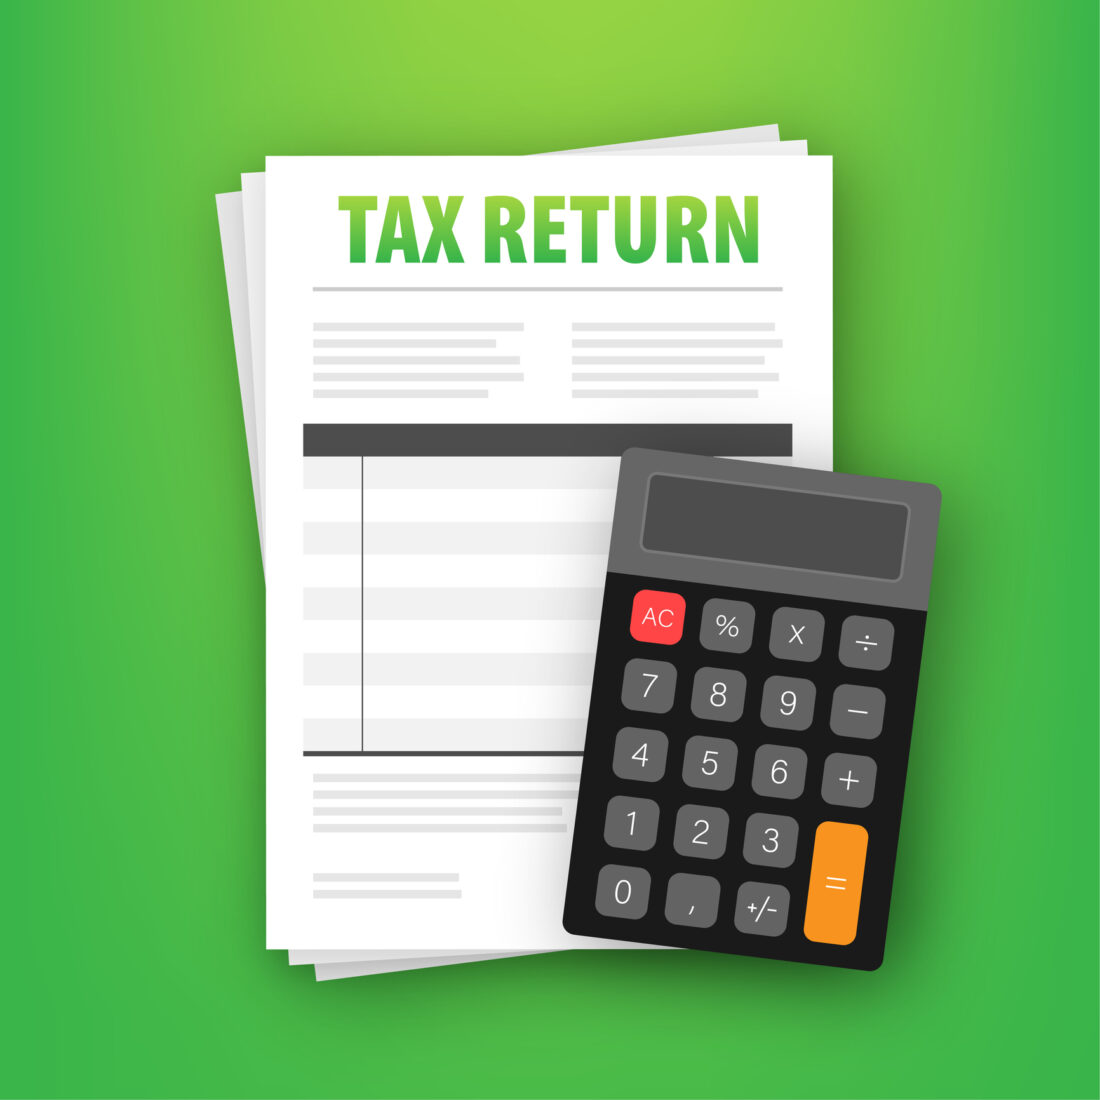 Tax Return for Tax Rebate for Uniform Icon